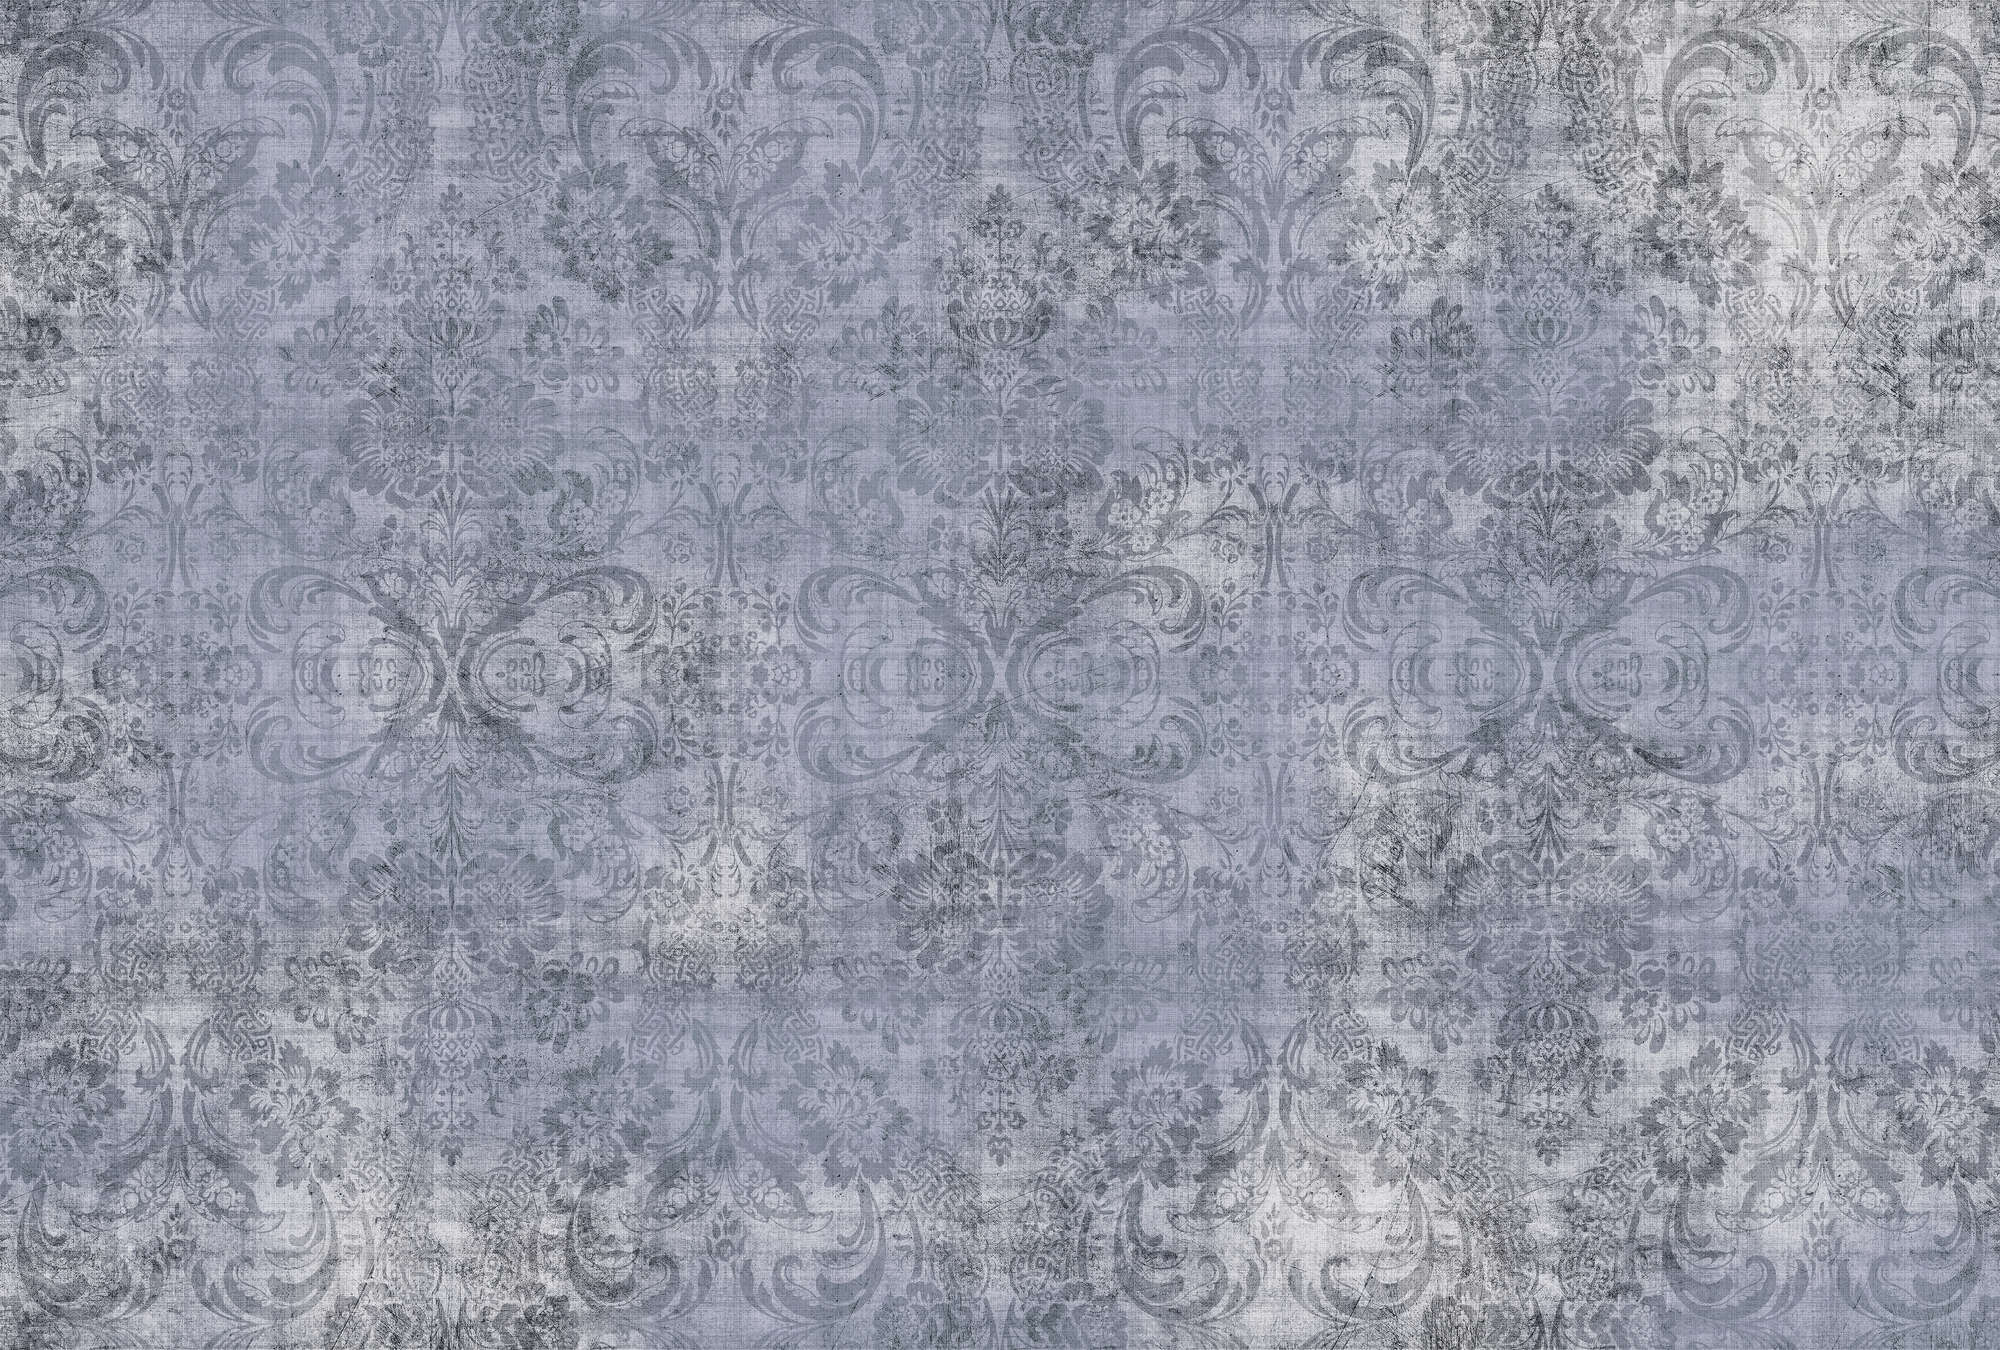             Old damask 3 - wallpaper in natural linen structure blue mottled ornaments - Blue | mother-of-pearl smooth fleece
        